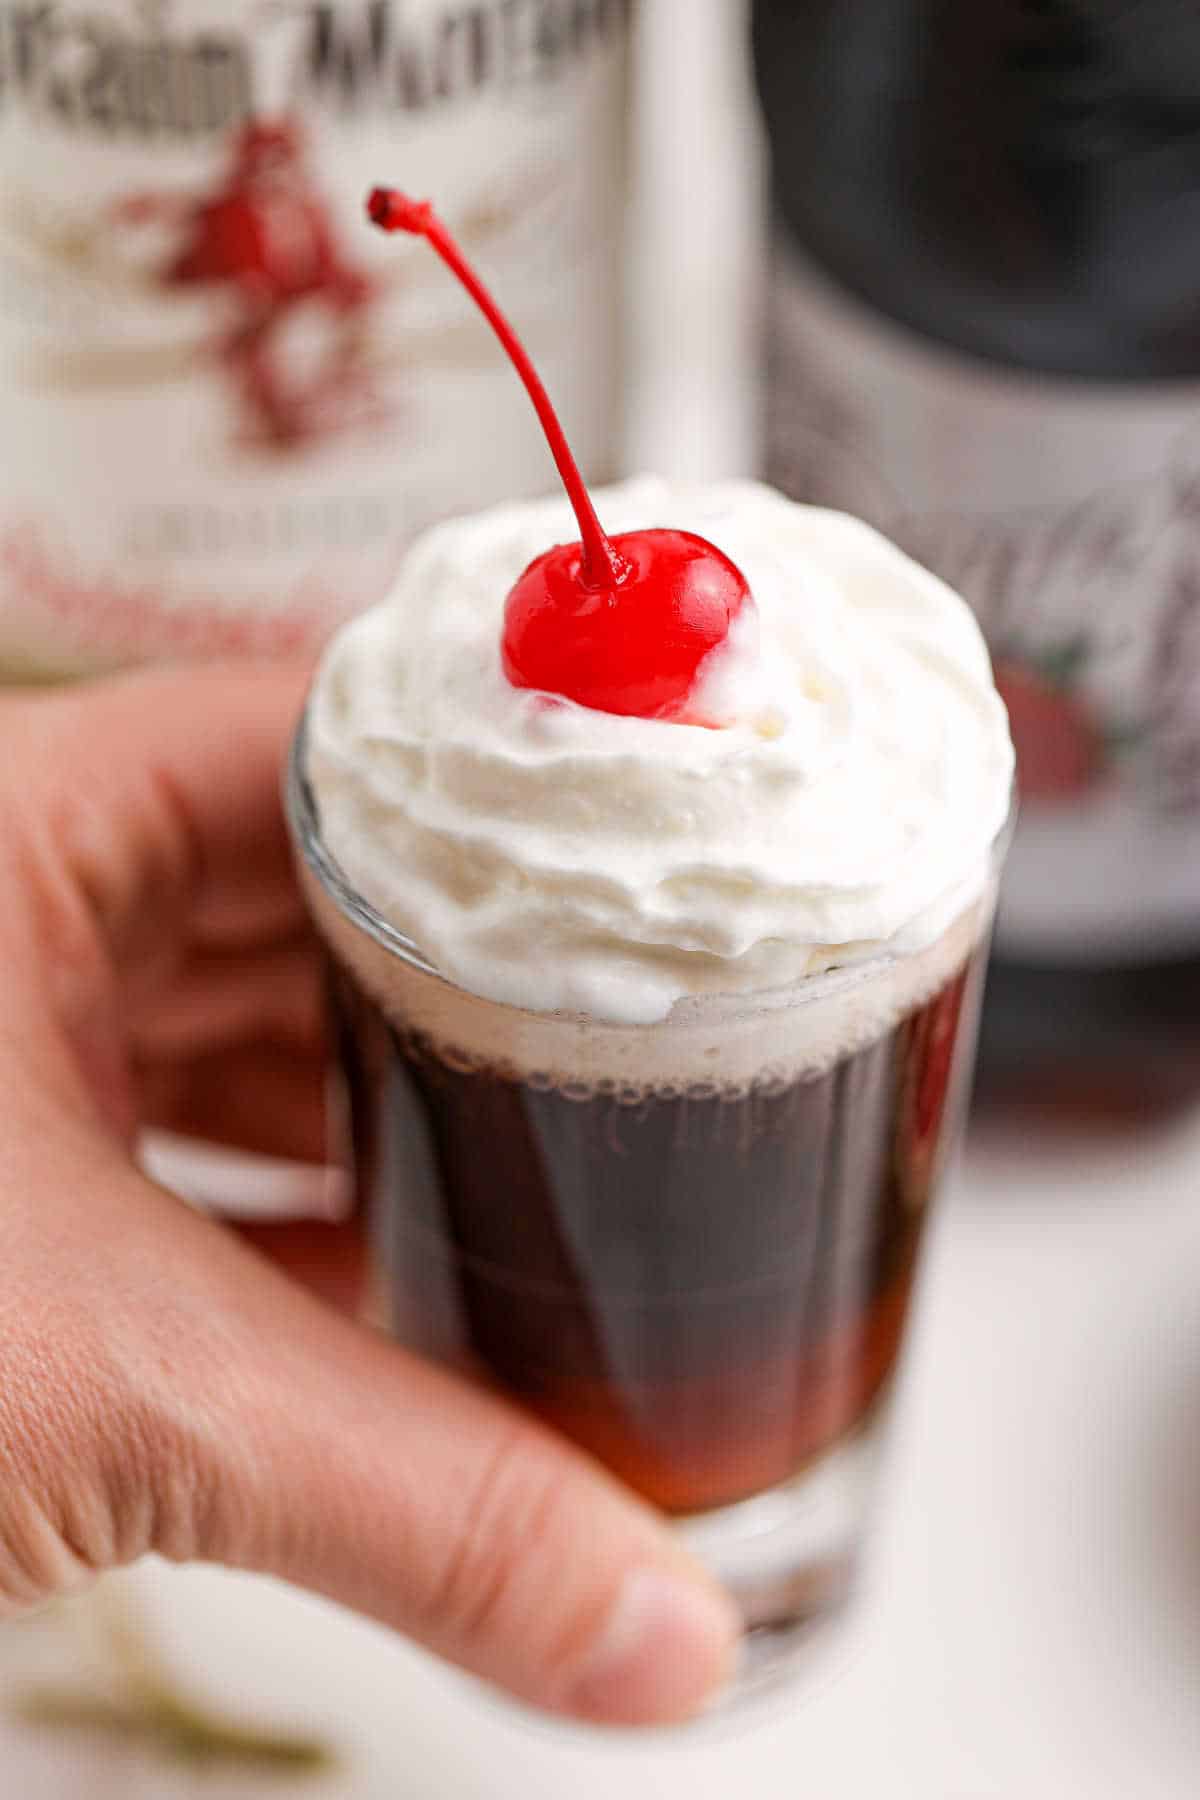 A hand holding a root beer shooter.